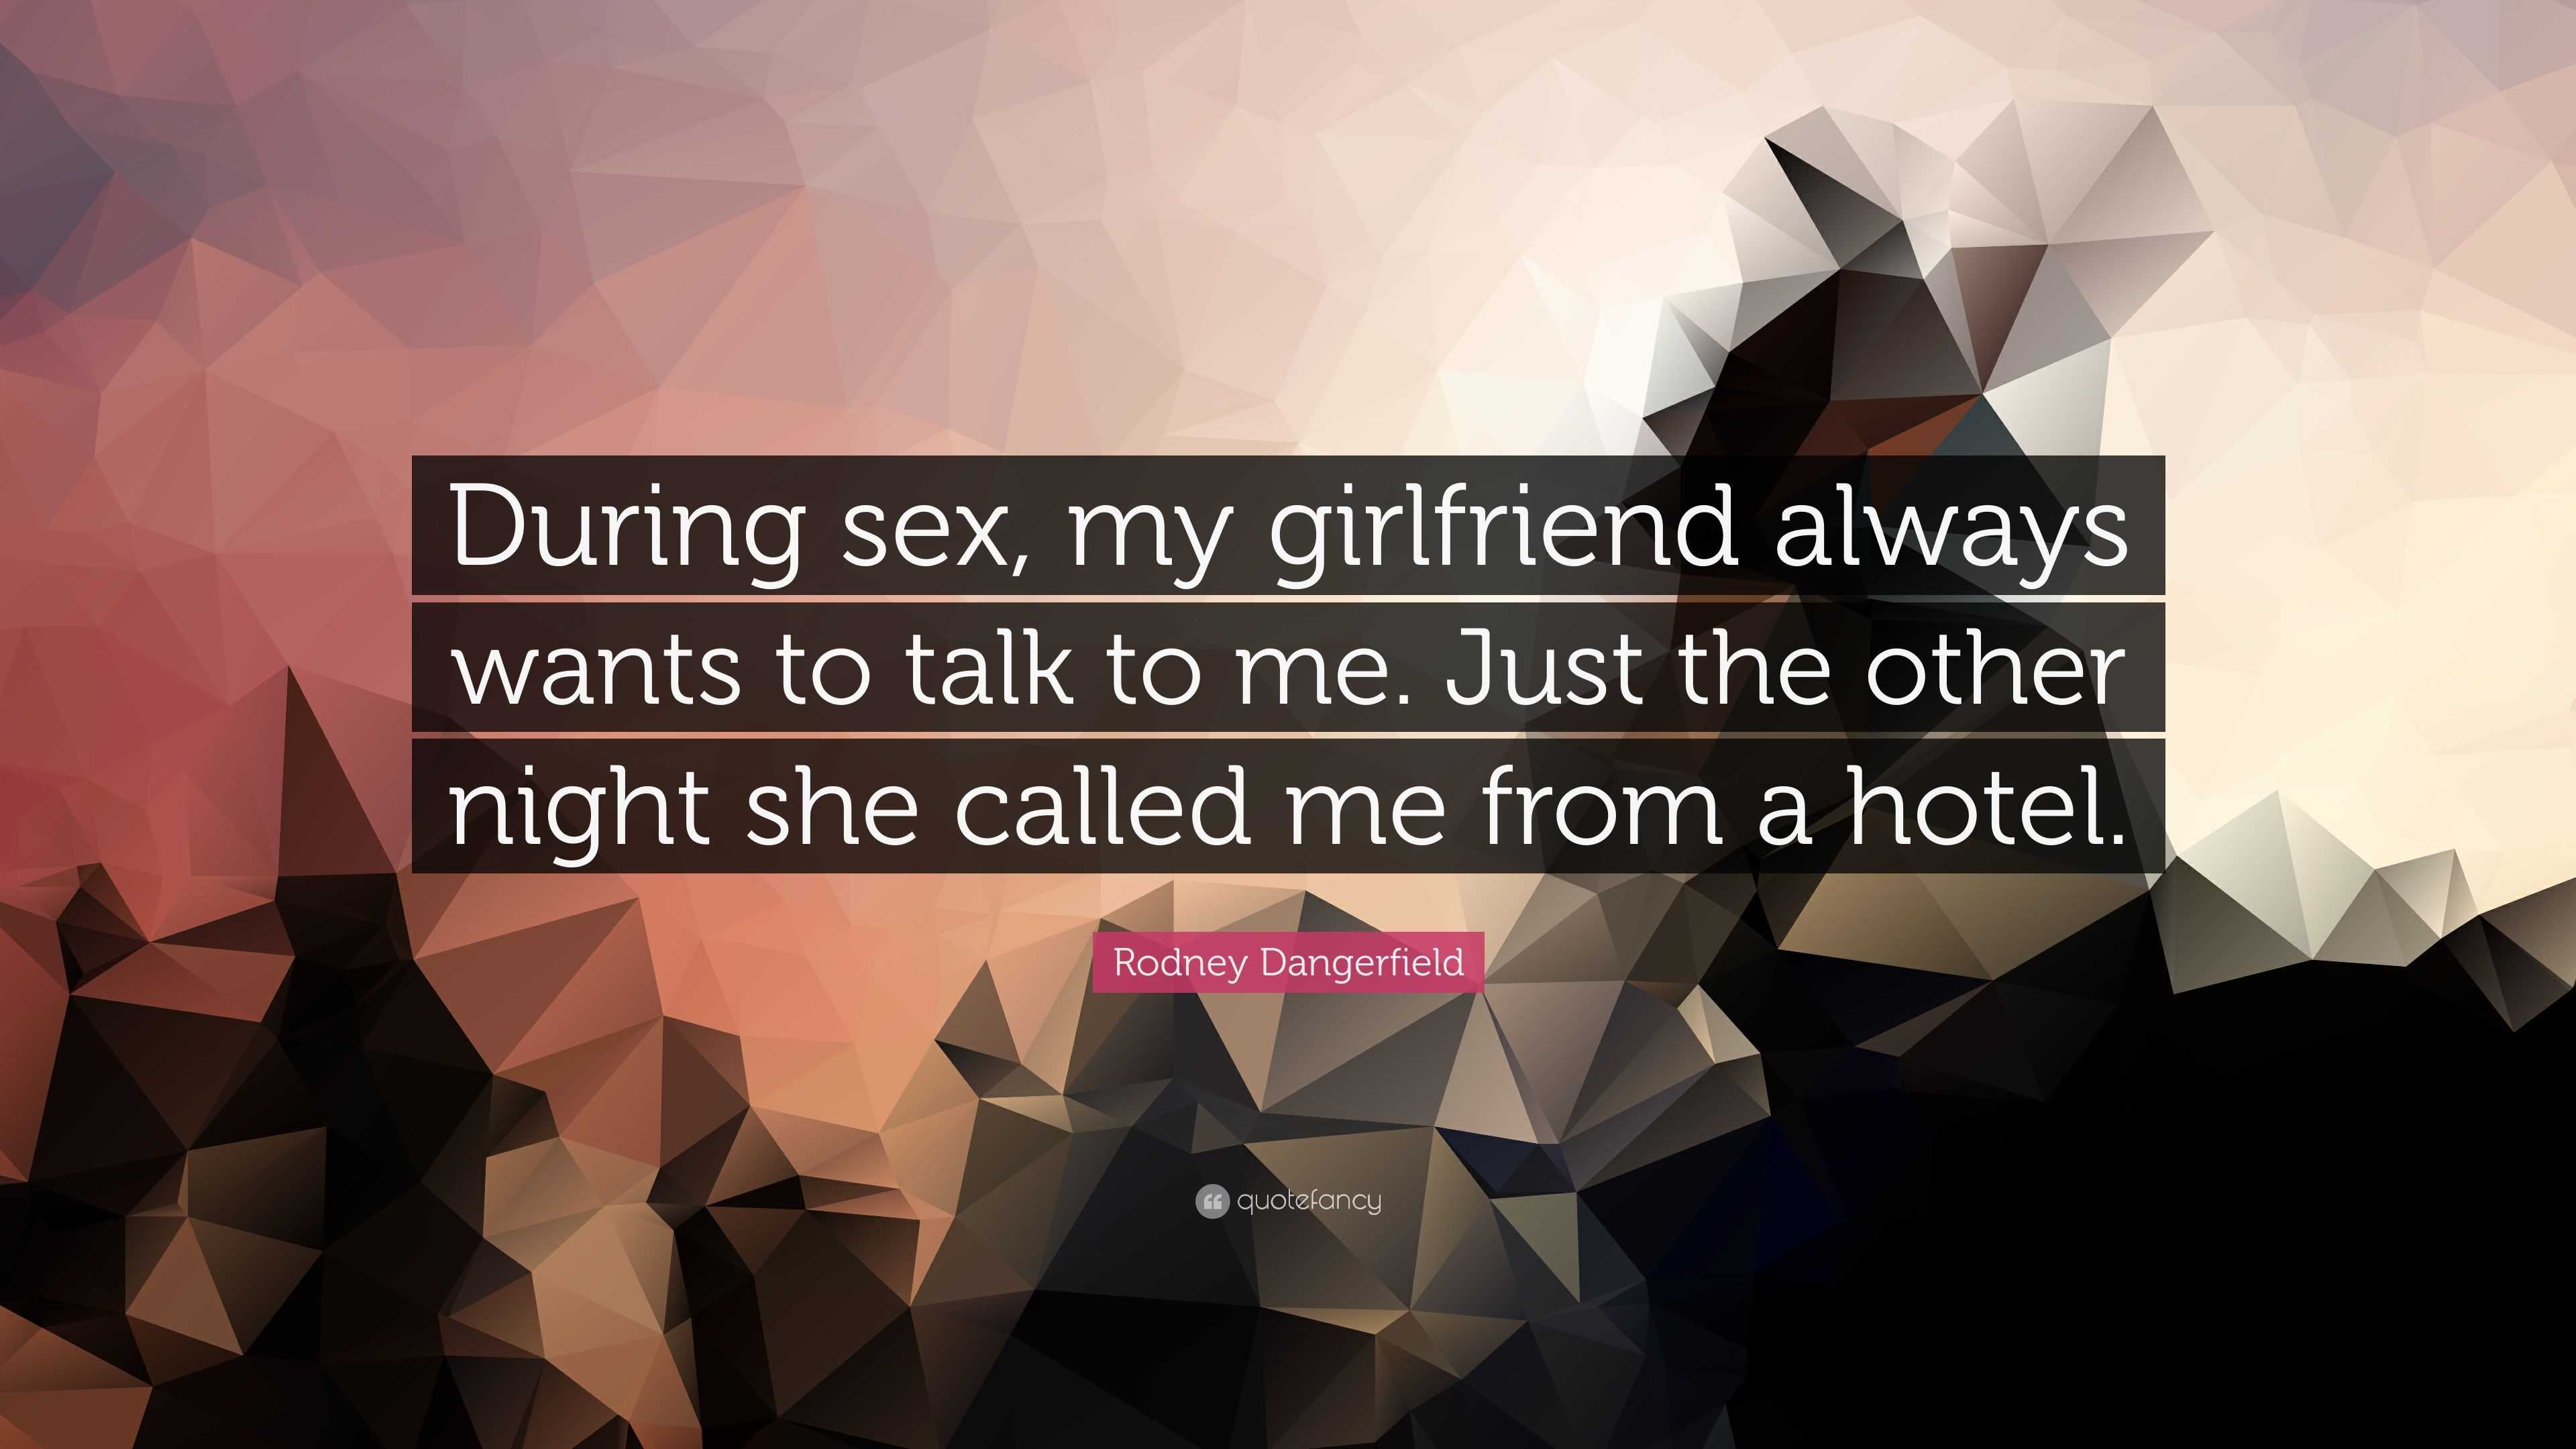 Rodney Dangerfield Quote “During sex, my girlfriend always wants to talk to me picture picture